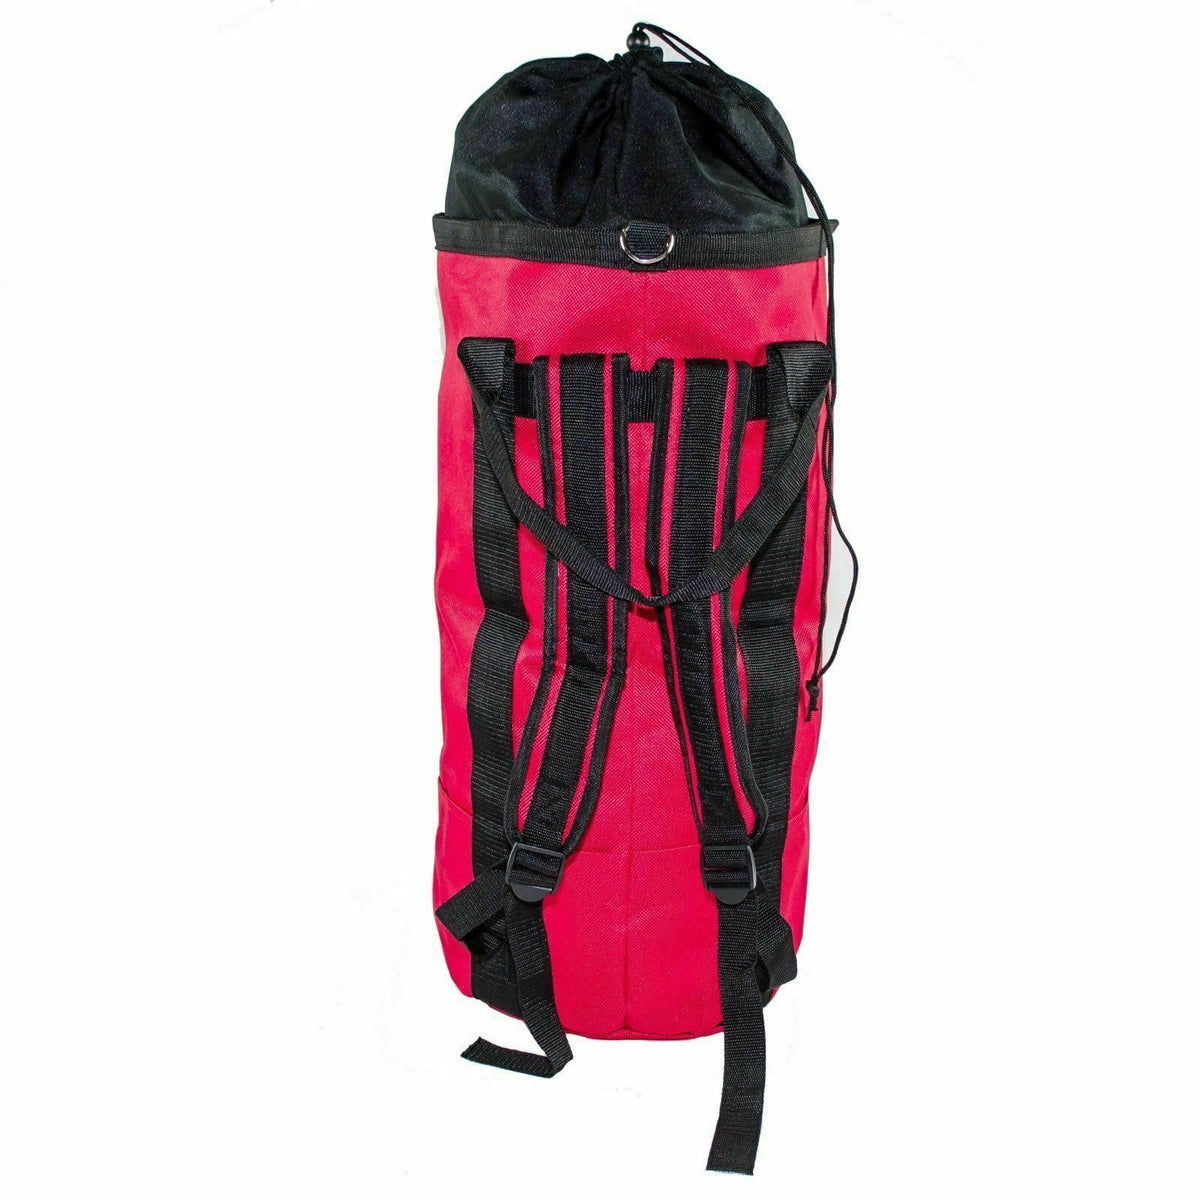 Arborist Tree Workers Climbing Rope Bag Gear Bag Keeps Gear And Rope Clean 36"X12"